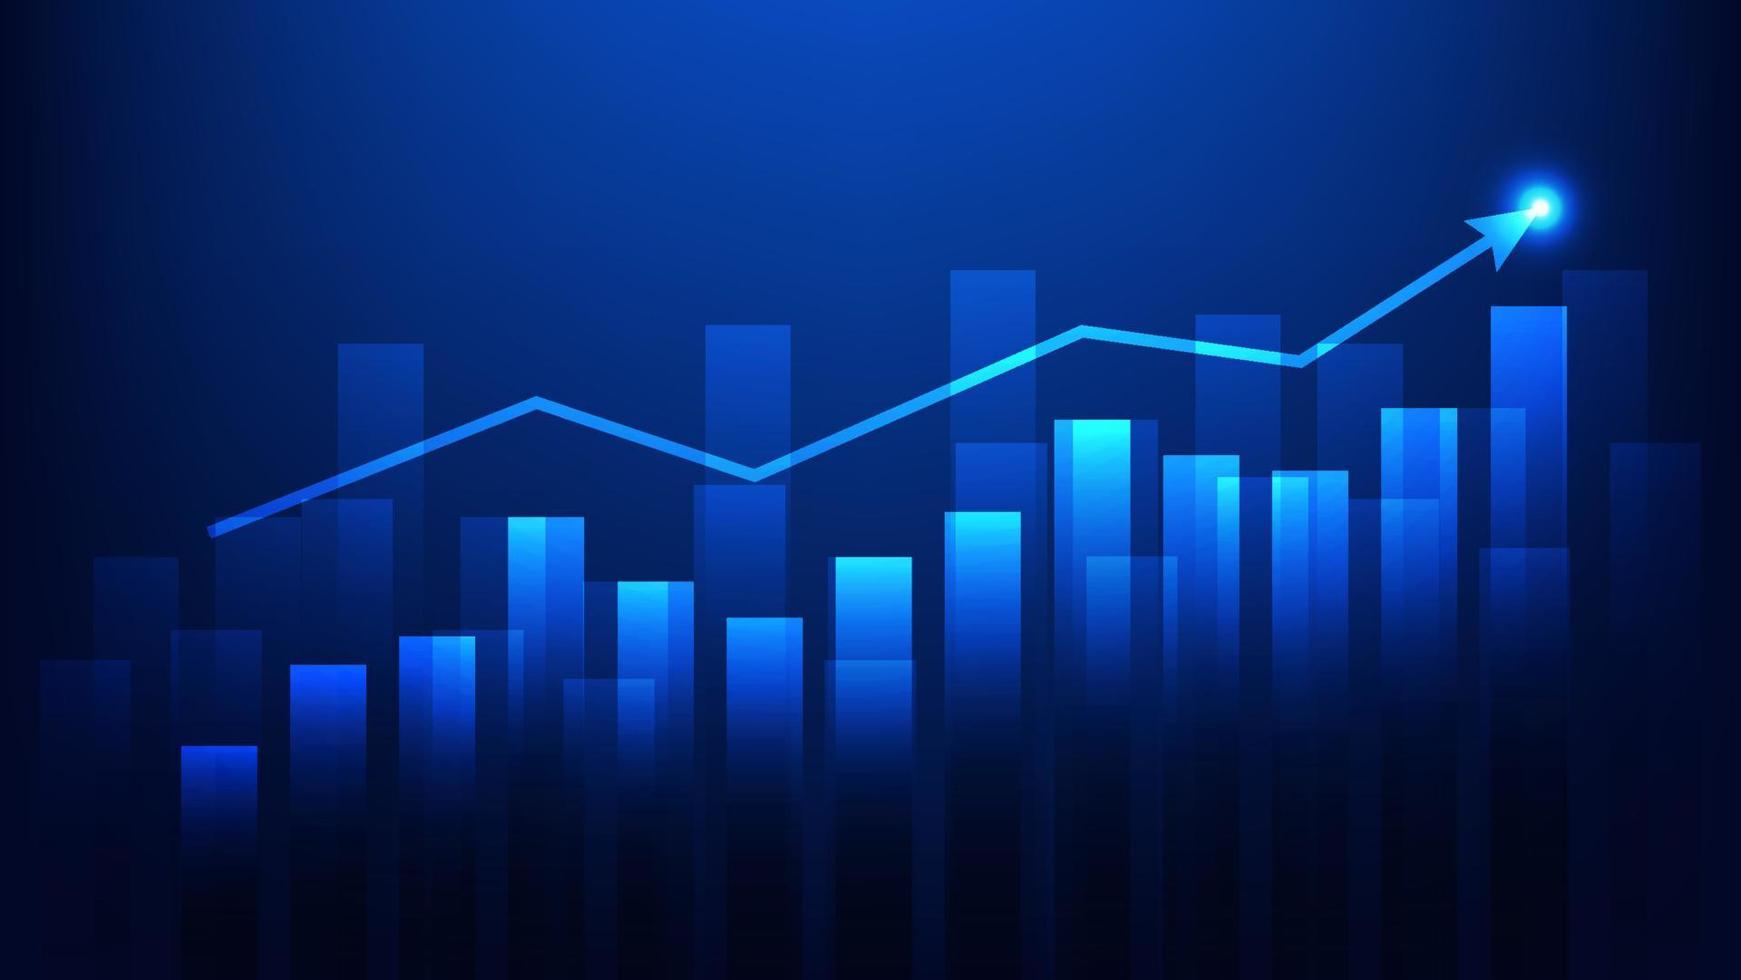 bar chart with uptrend arrow show  growth of business performance and profit of investment on blue background vector